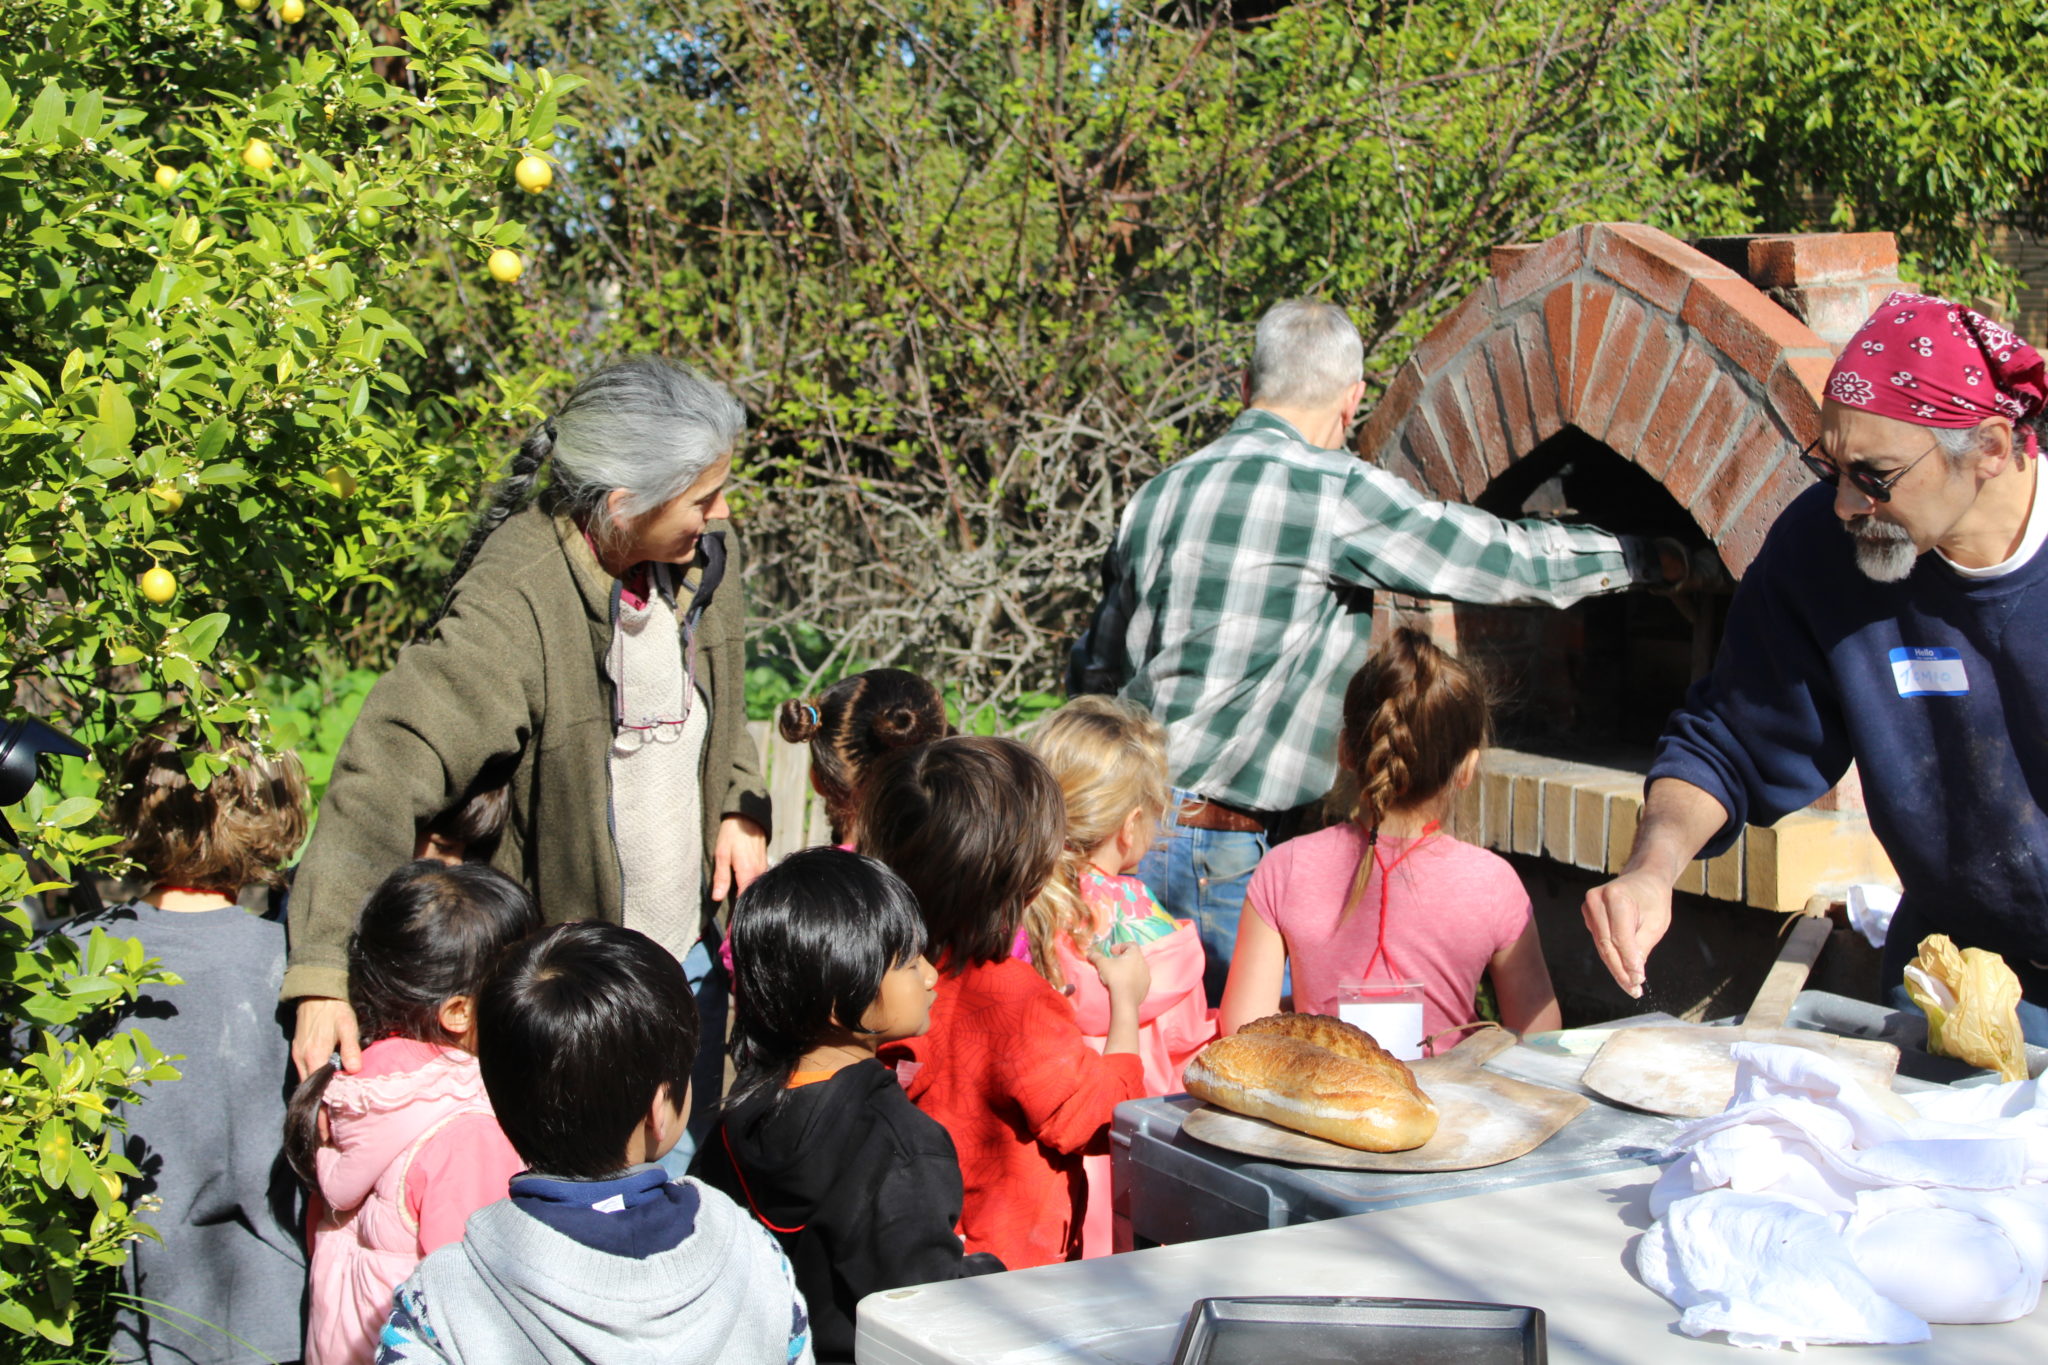 Children look on and learn about the baking process for bread.